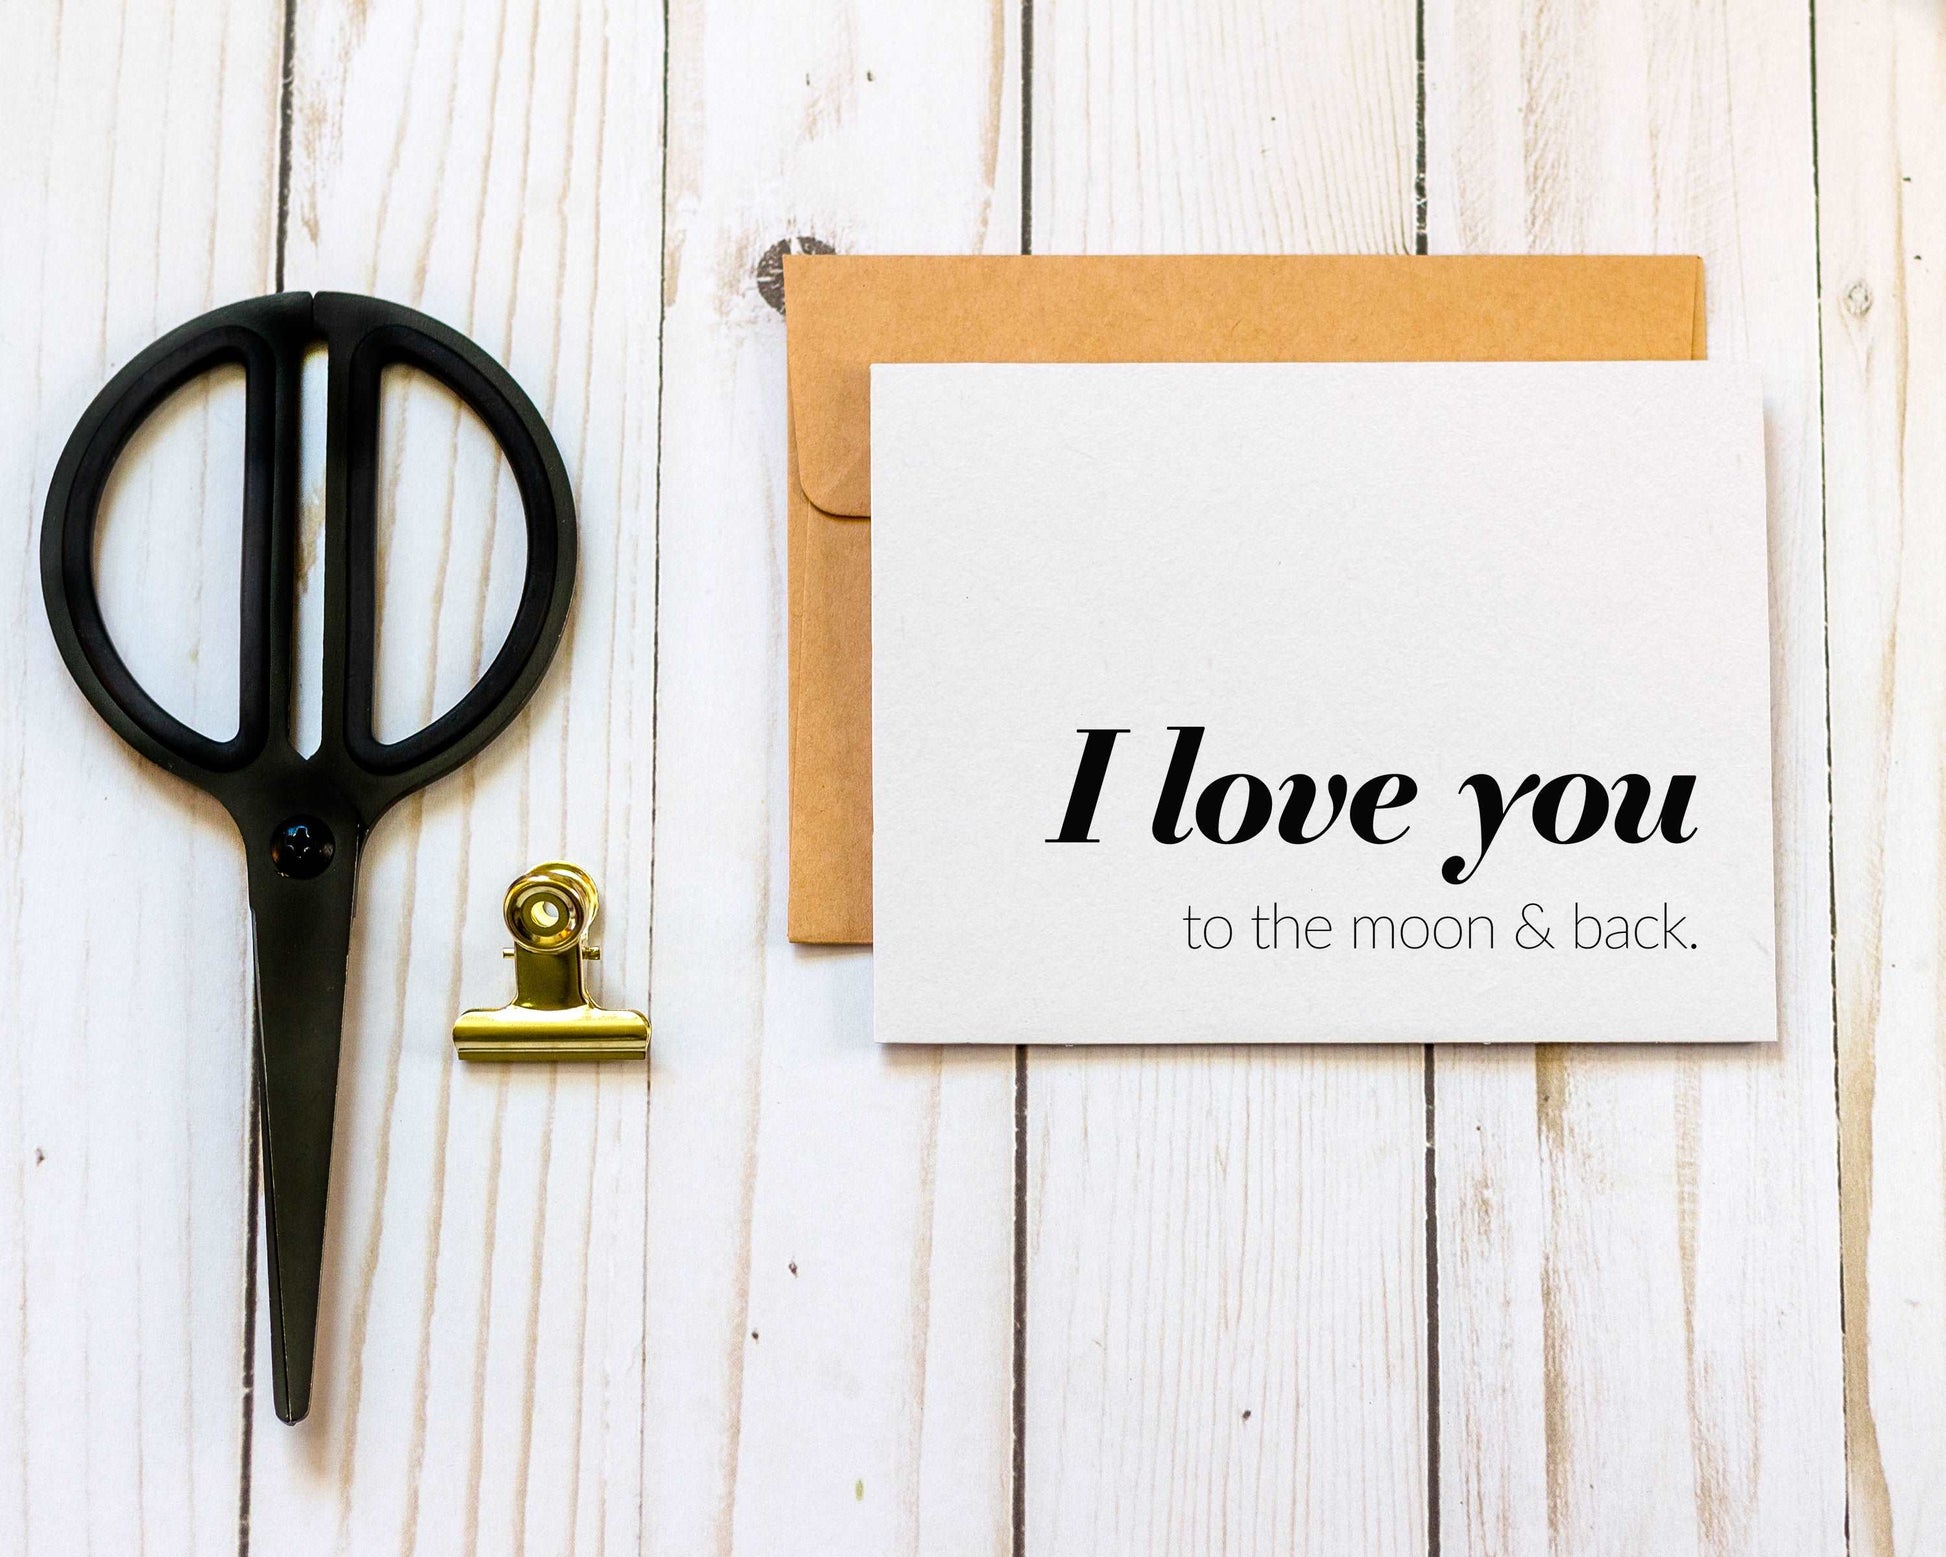 I Love You to the Moon and Back | Valentine's Day Greeting Card with Envelope